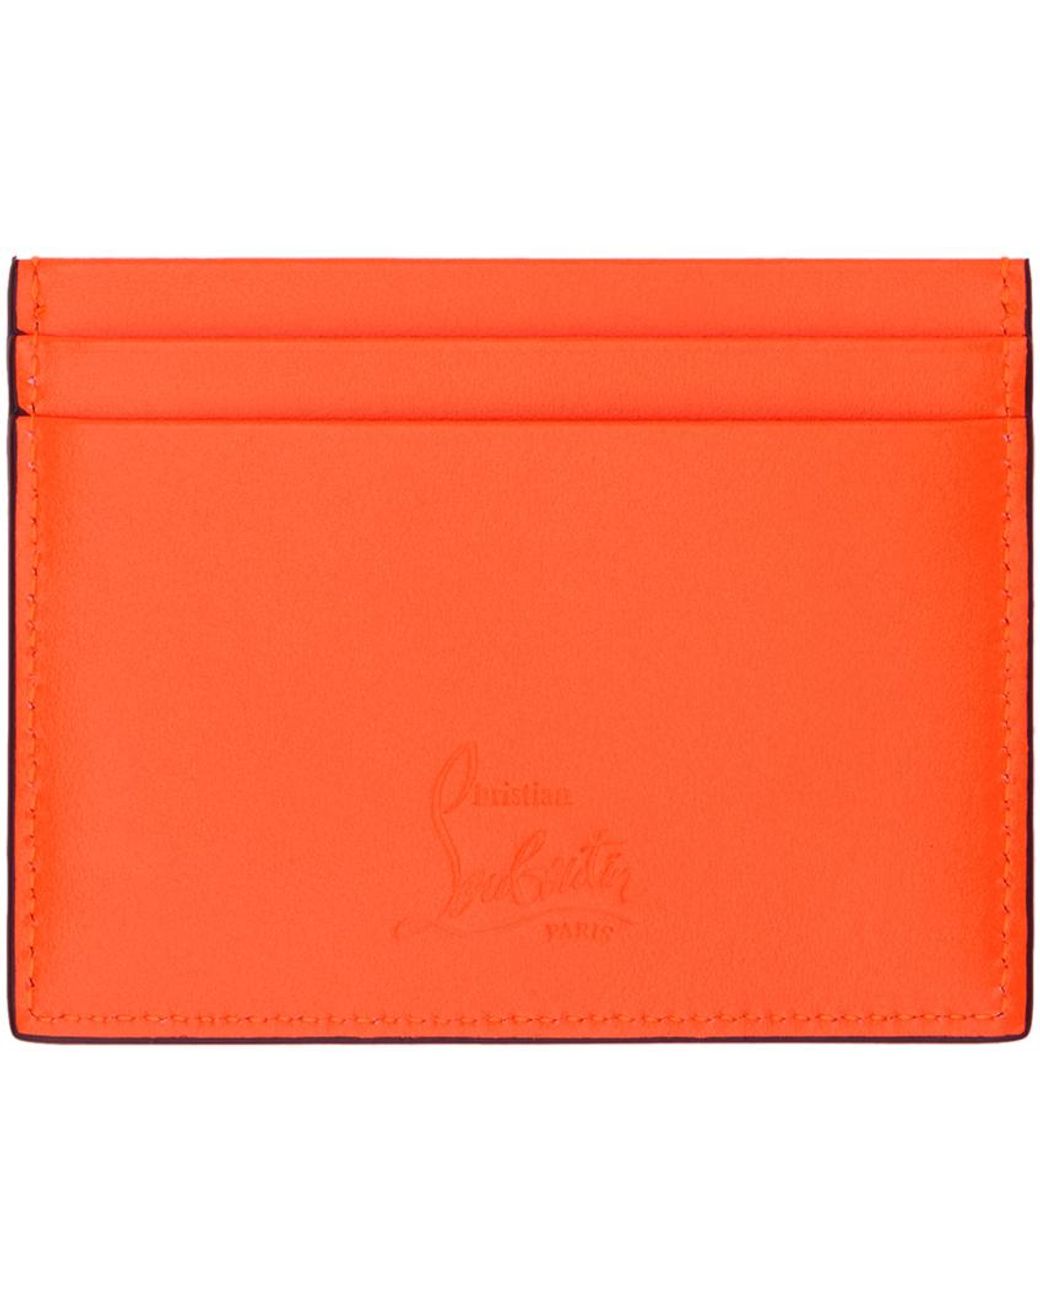 Men's Louis Vuitton Wallets and cardholders from C$342